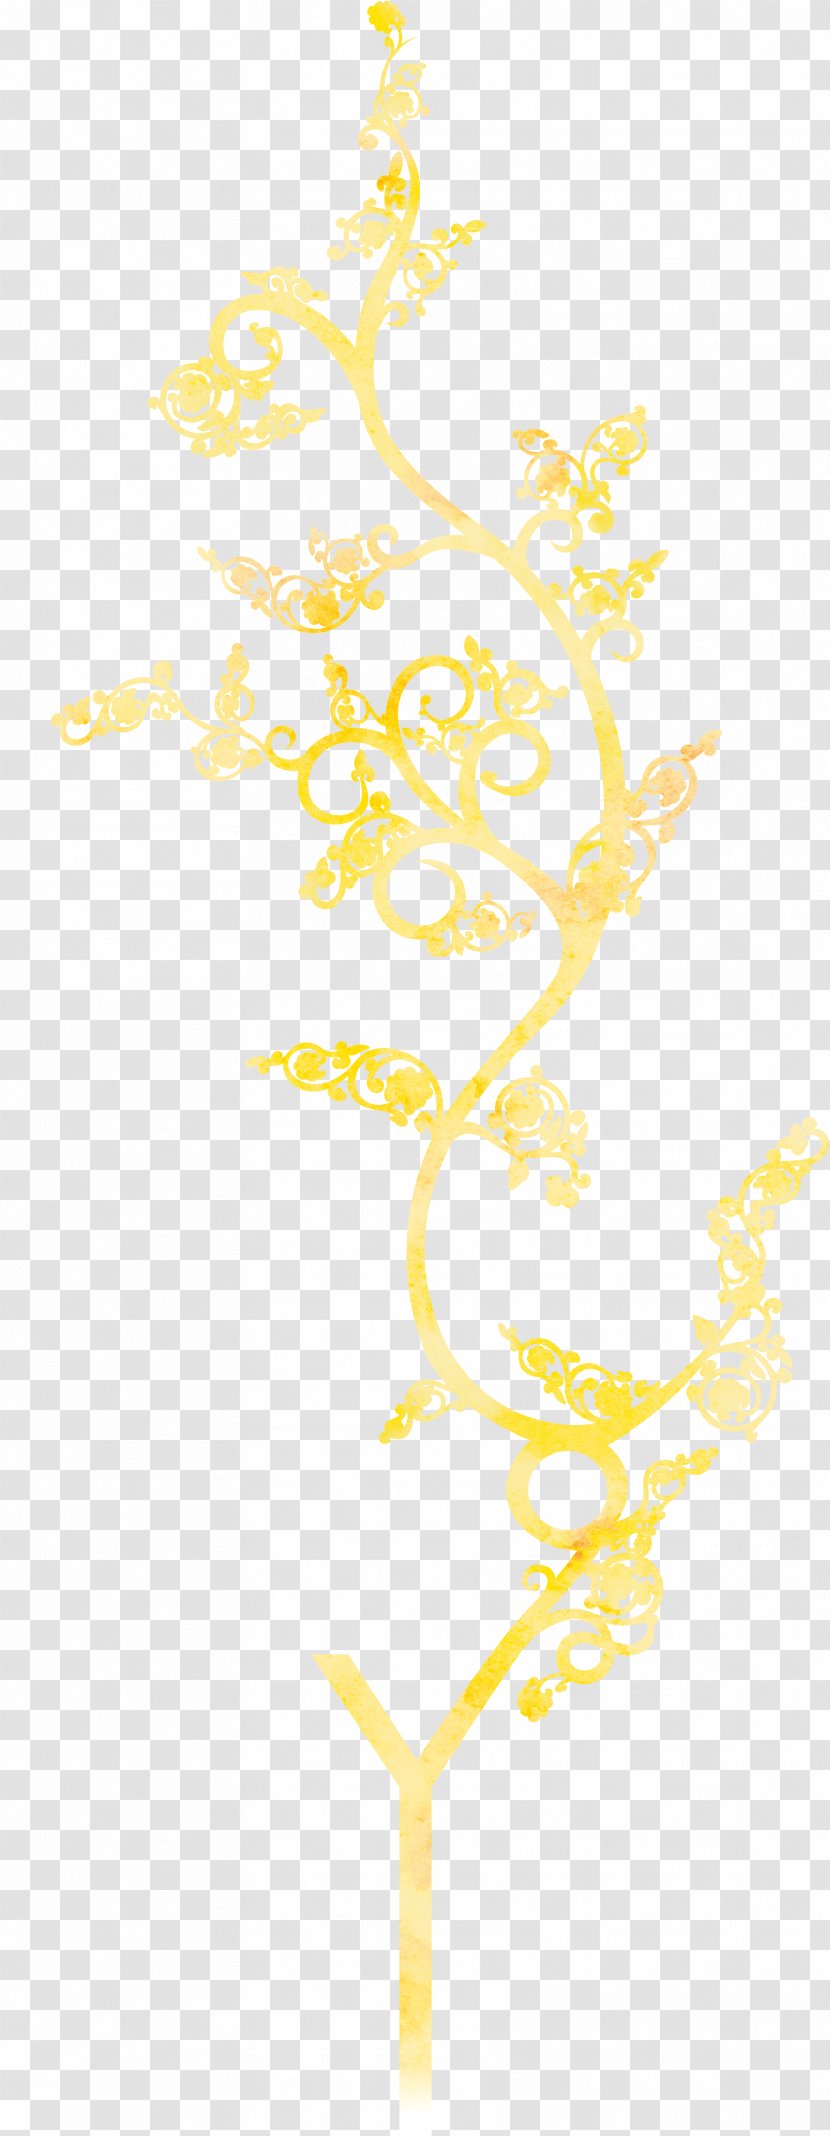 Staff Of Hermes Caduceus As A Symbol Medicine Rod Asclepius Pharmacy - Aesthethic Vector Transparent PNG